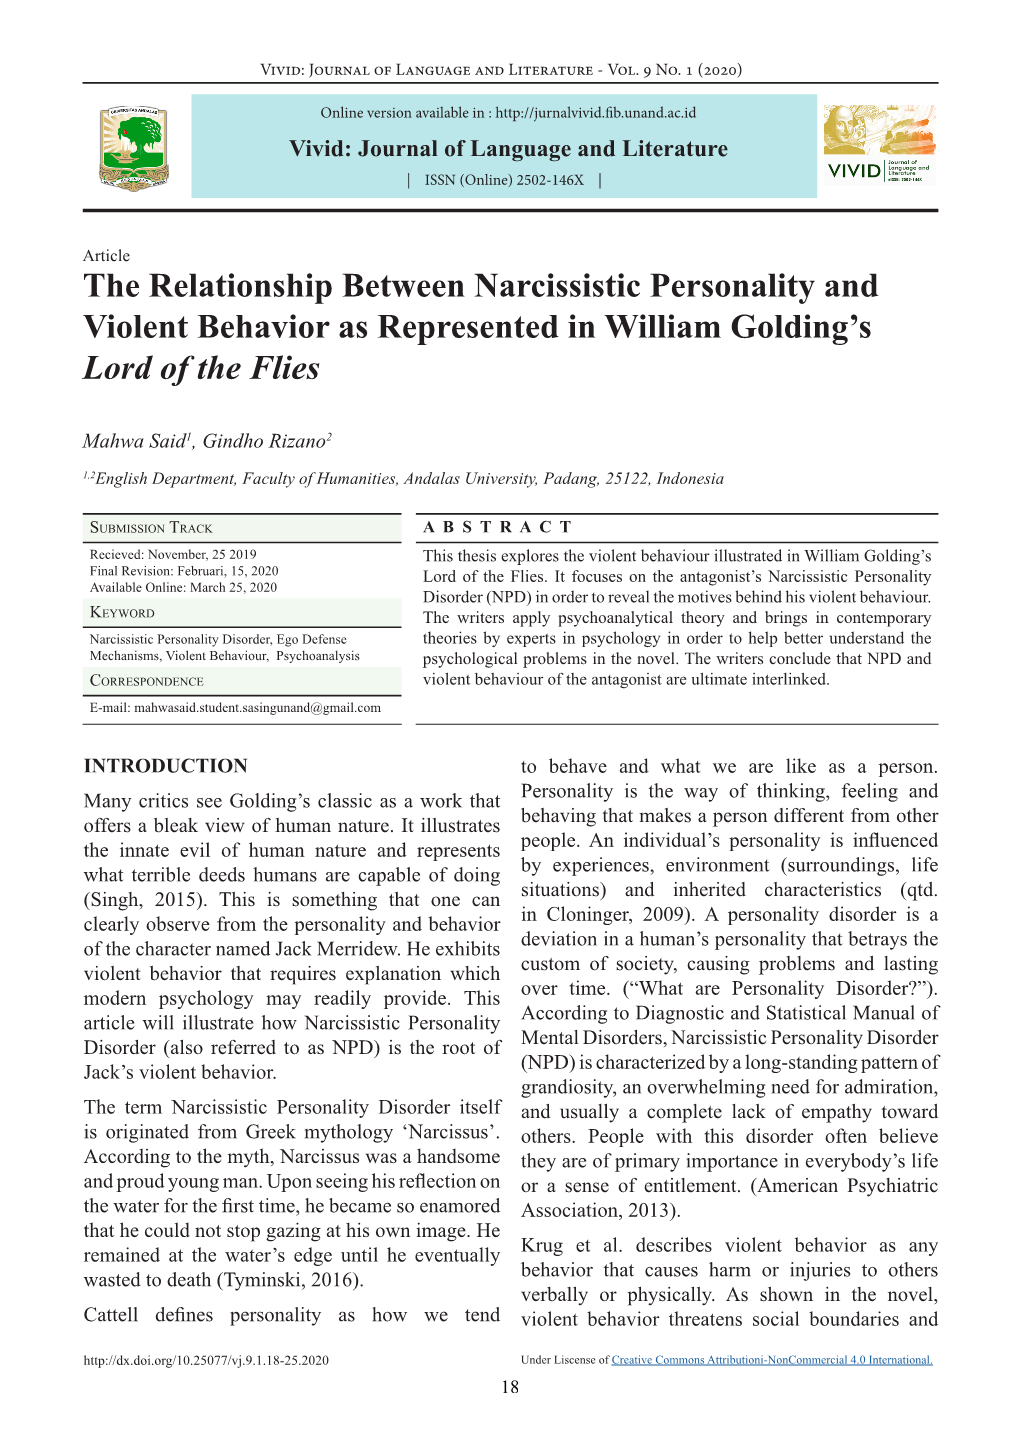 The Relationship Between Narcissistic Personality and Violent Behavior As Represented in William Golding’S Lord of the Flies